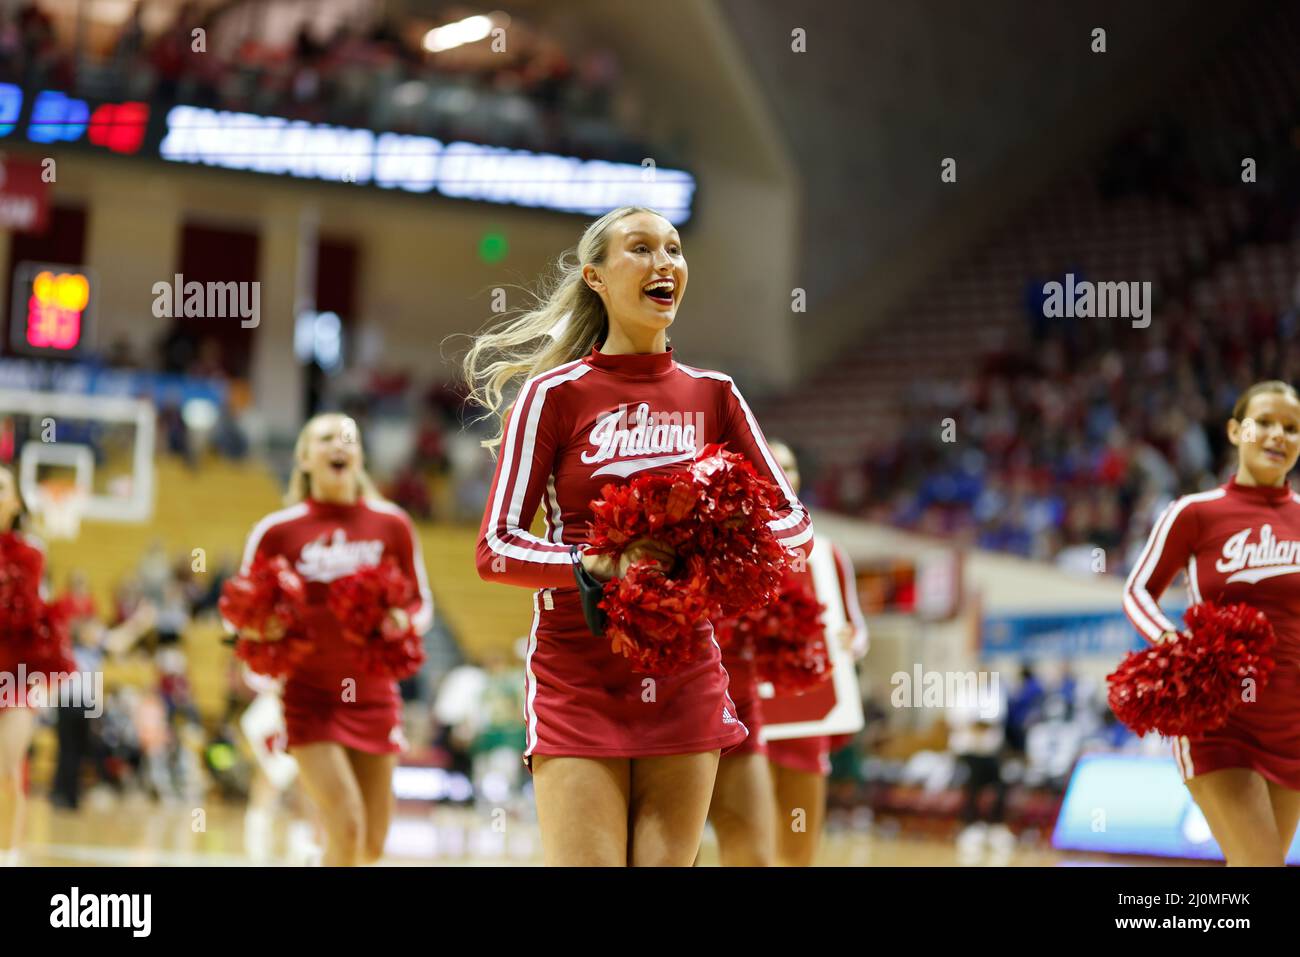 Bloomington, United States. 19th Mar, 2022. Indiana University cheerleaders cheer for the Hoosiers against Charlotte during round 1 of the 2022 NCAA Division 1 Women's Basketball Championship, at Simon Skjodt Assembly Hall in Bloomington. Indiana University beat Charlotte 85-51. Credit: SOPA Images Limited/Alamy Live News Stock Photo